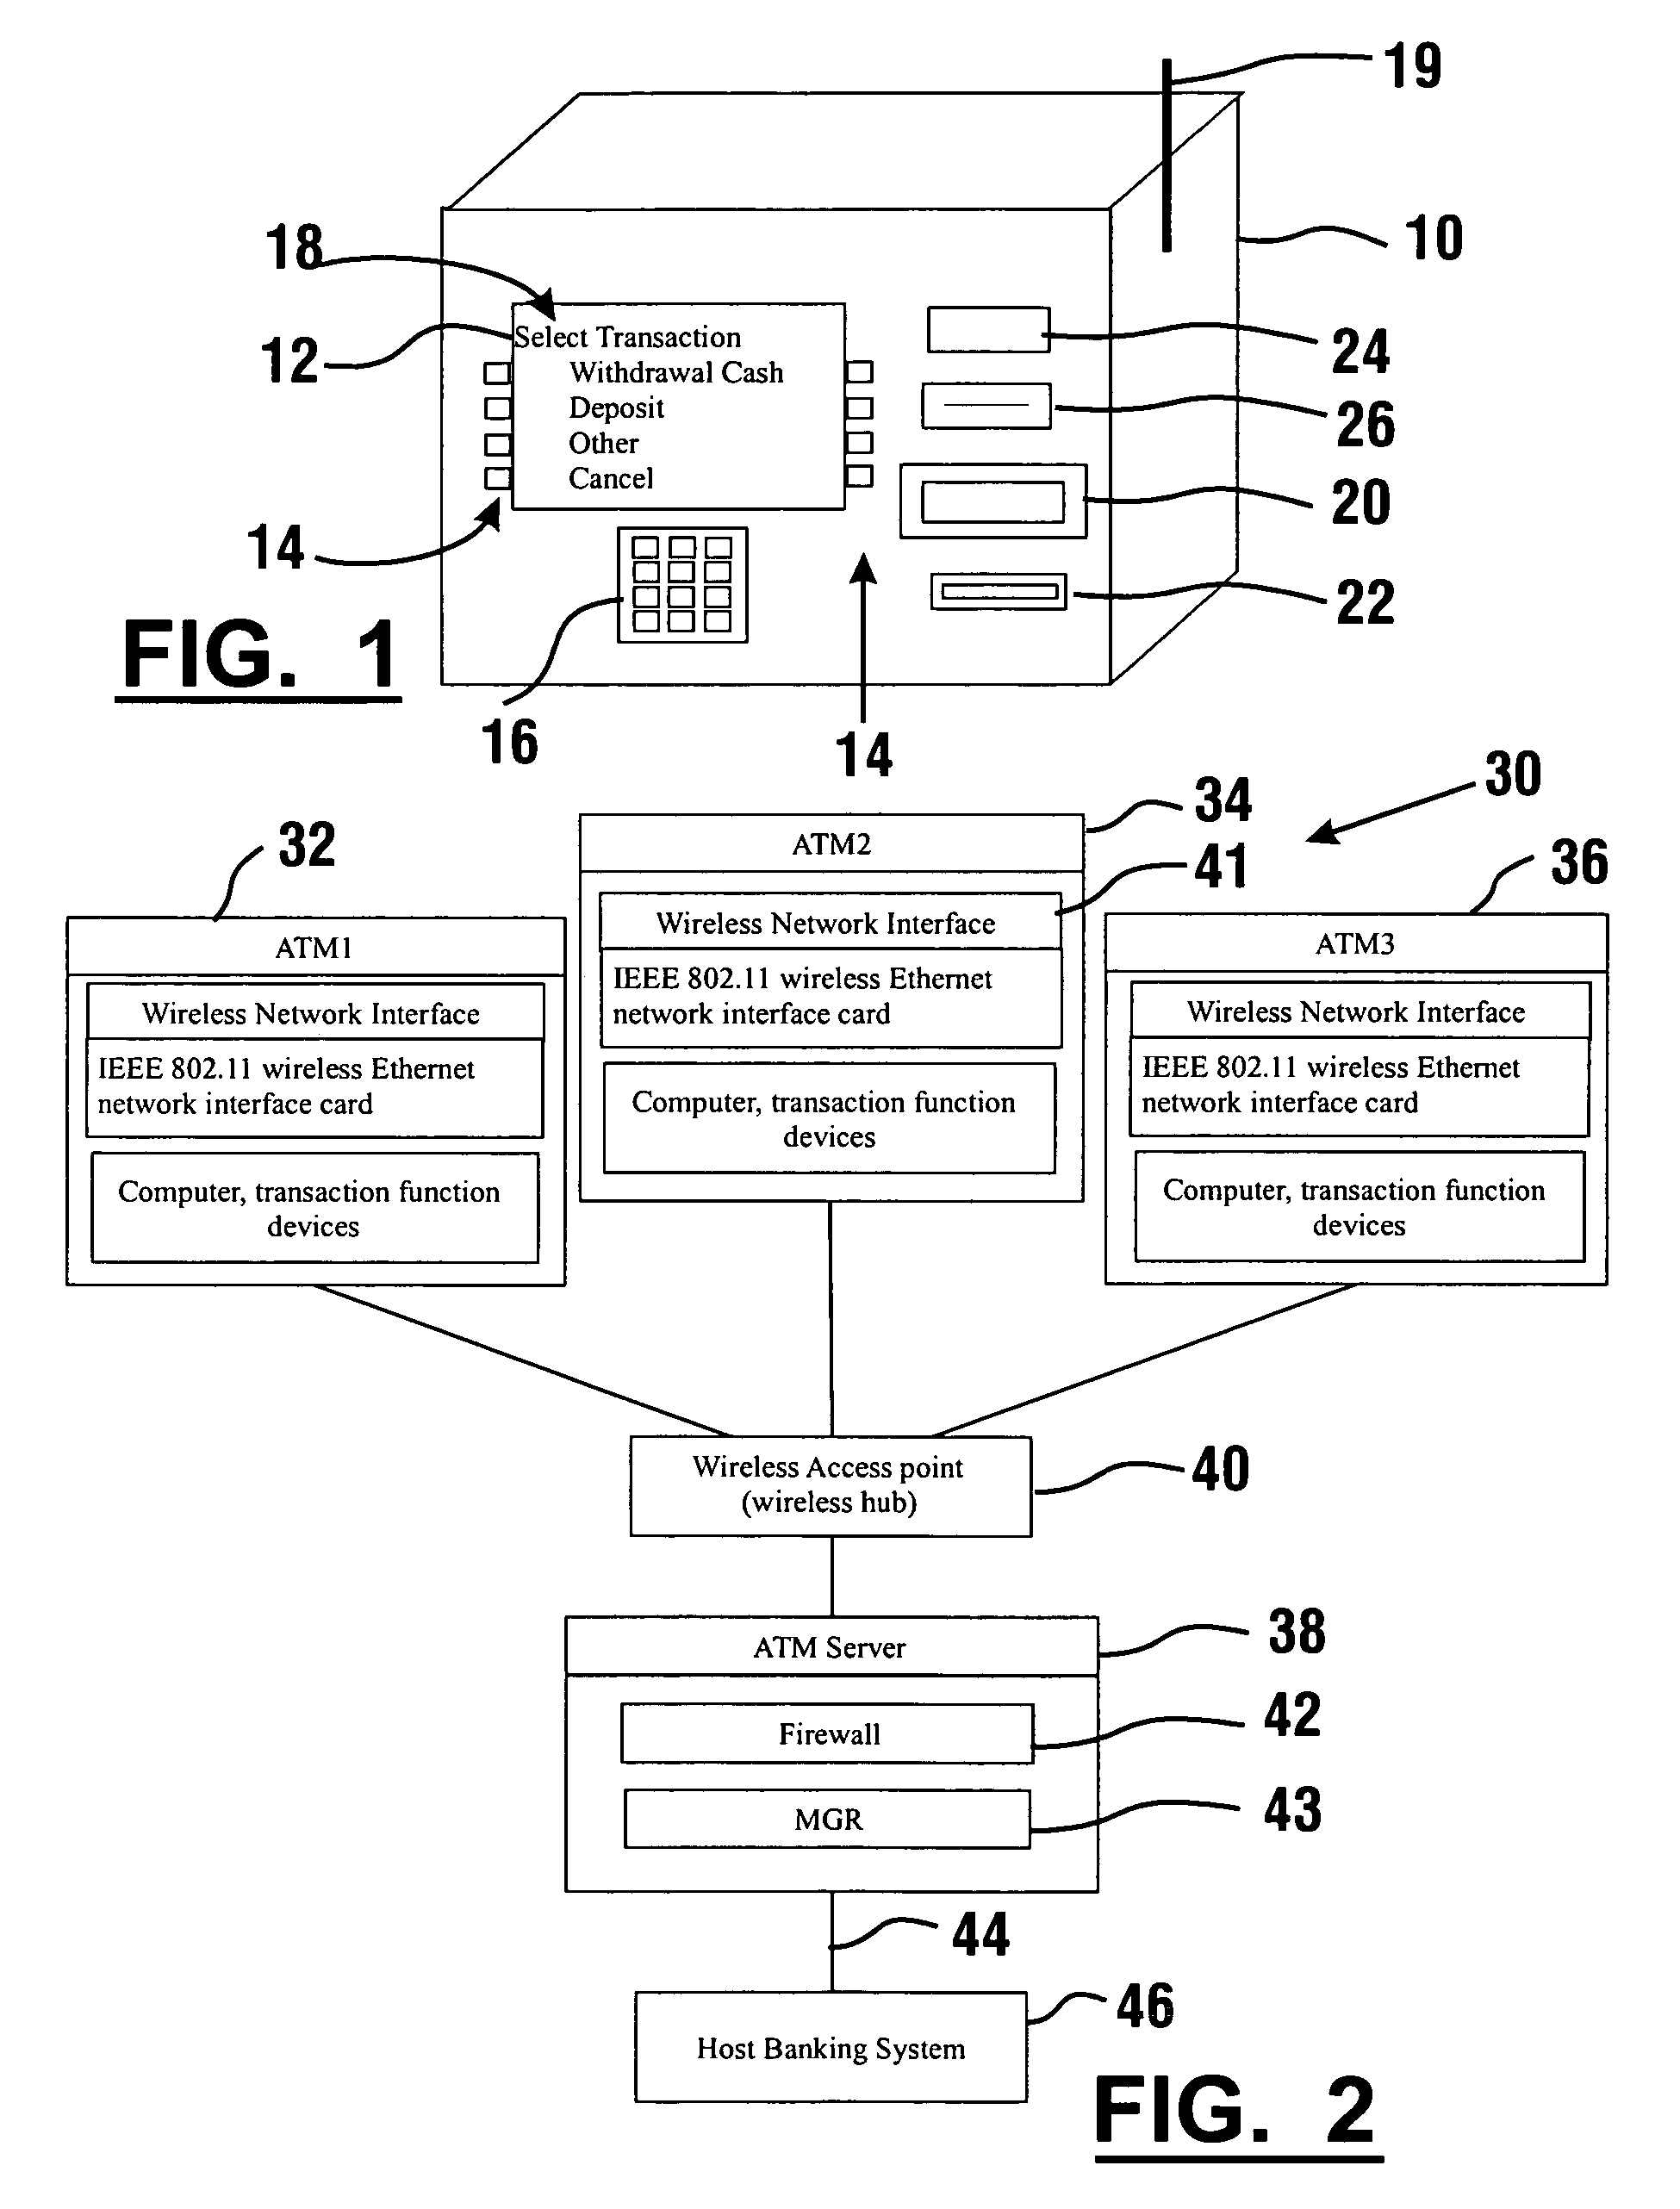 System and method of operating an automated banking machine system and method with inputs from a portable wireless device